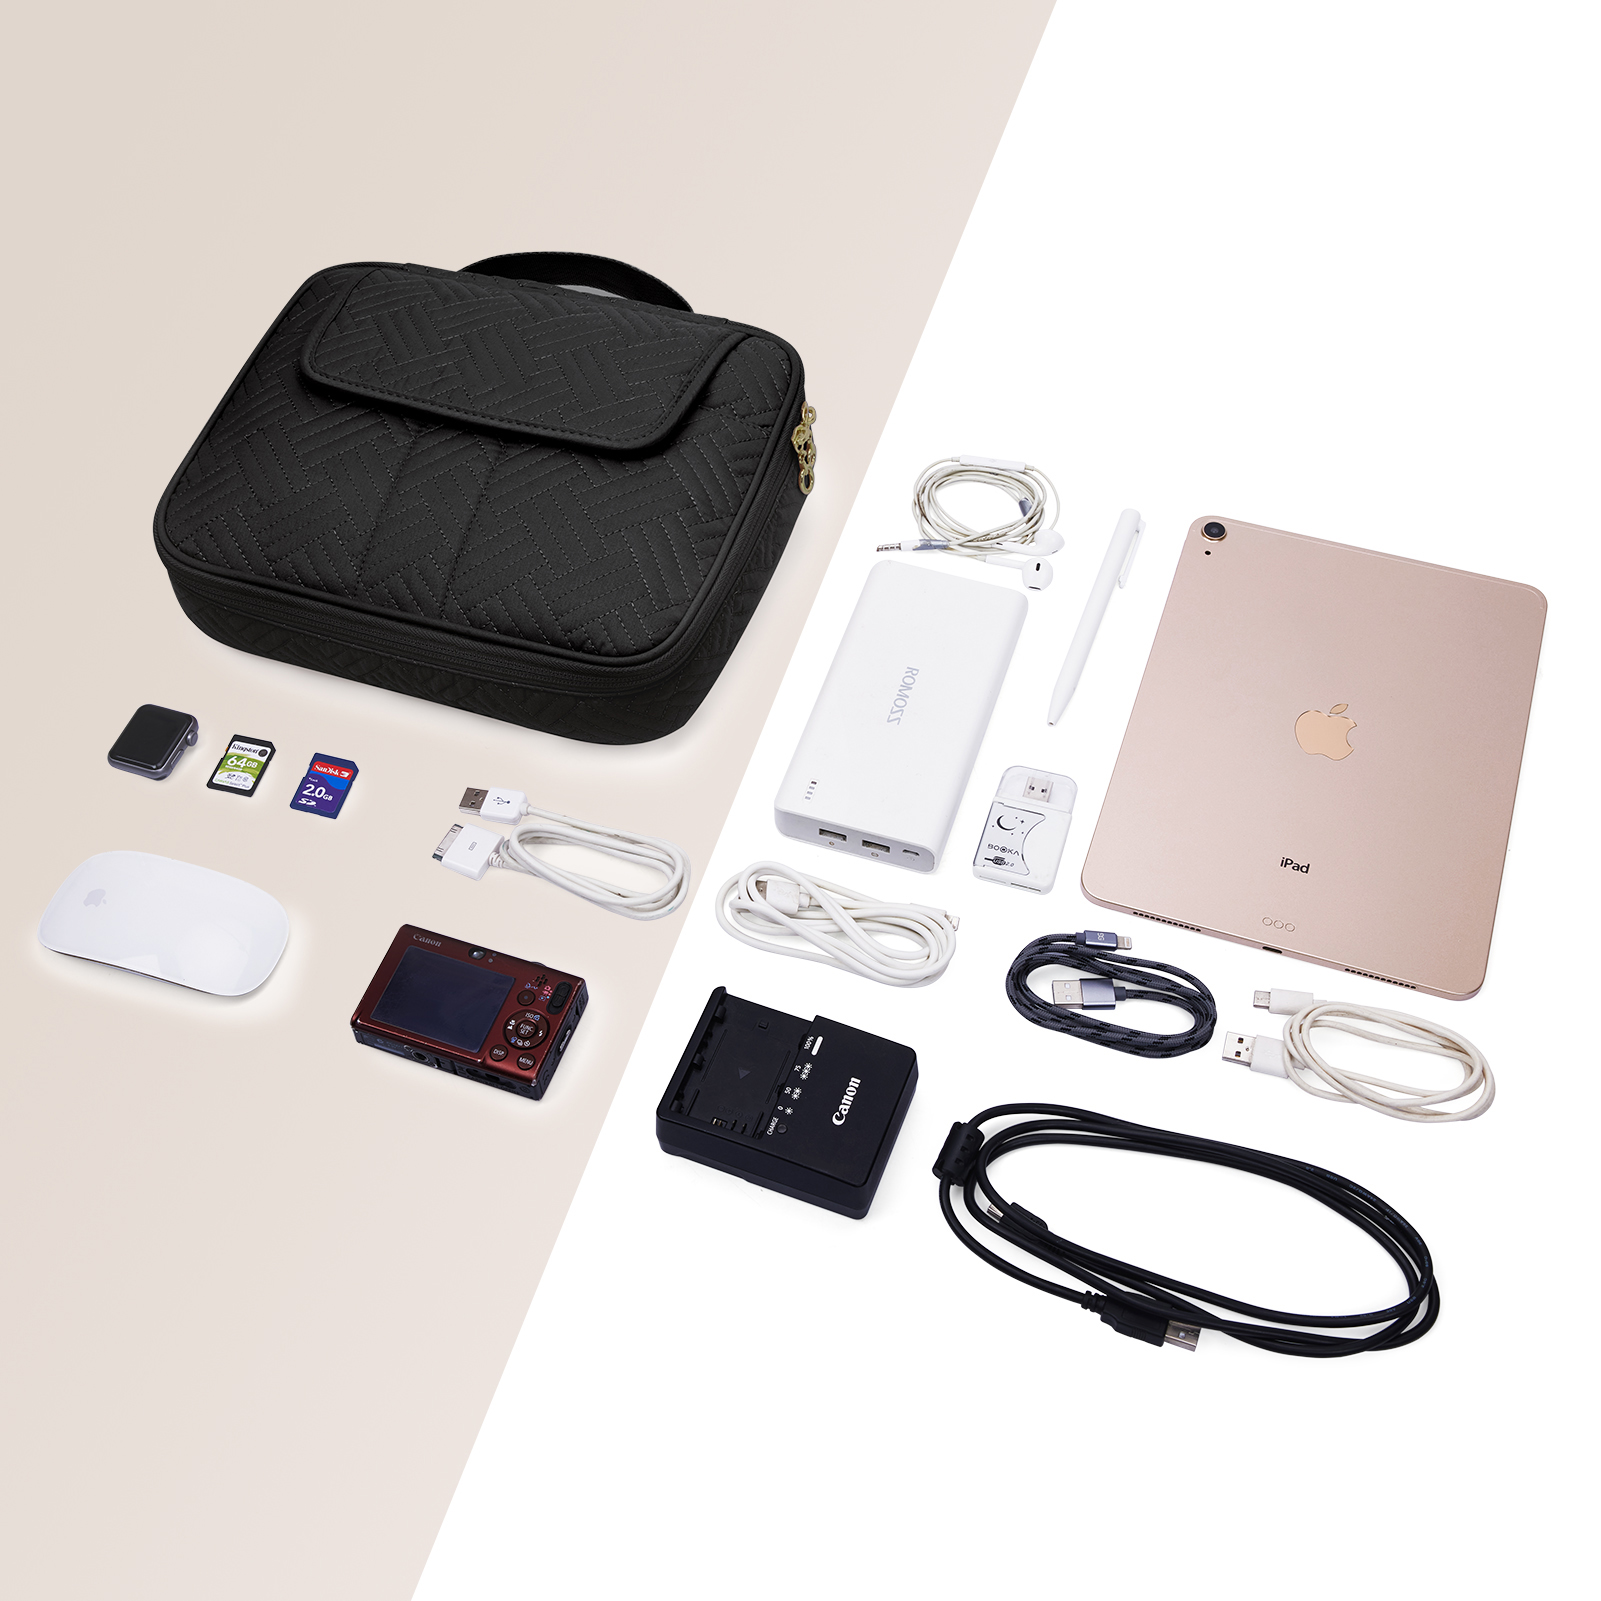 Double Layer Travel Electronic Organizer for All of your Accessories